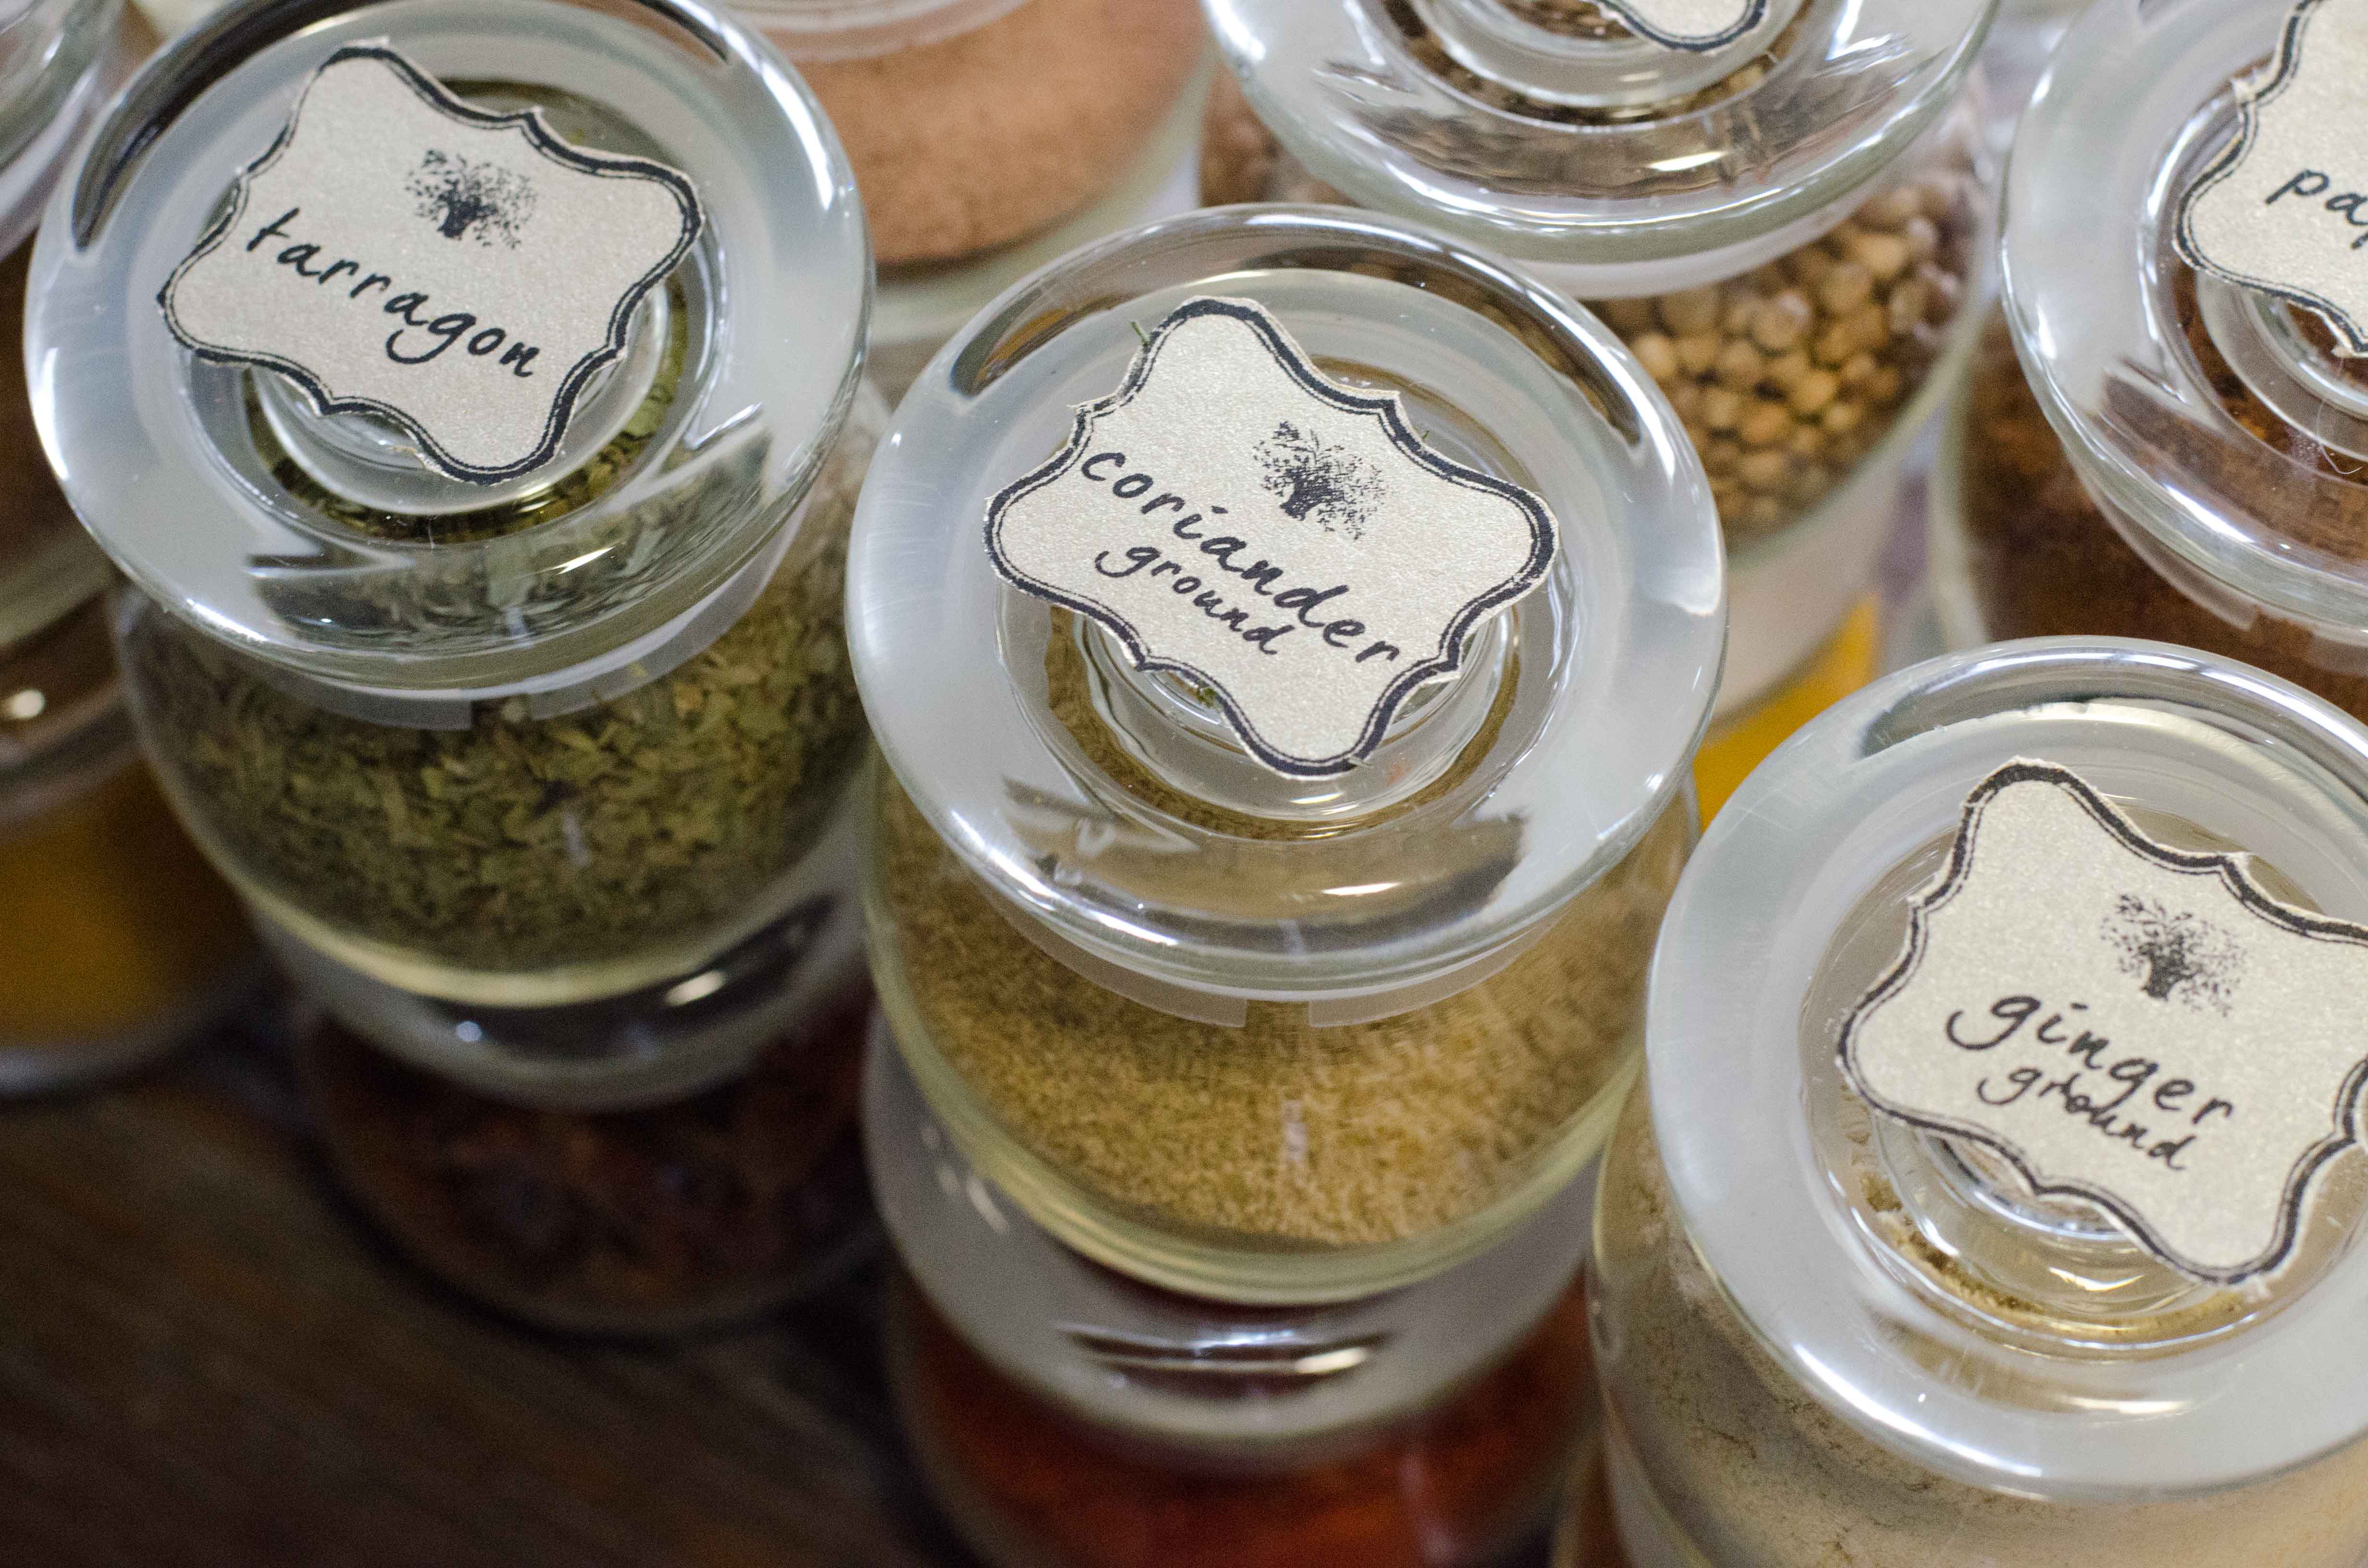 Spice Jars , Labelled Spice Jars , Spice Jars With Labels , Spice Jars Set  , Glass Spice Jars , Spice Jars With Lid , Spice Containers 